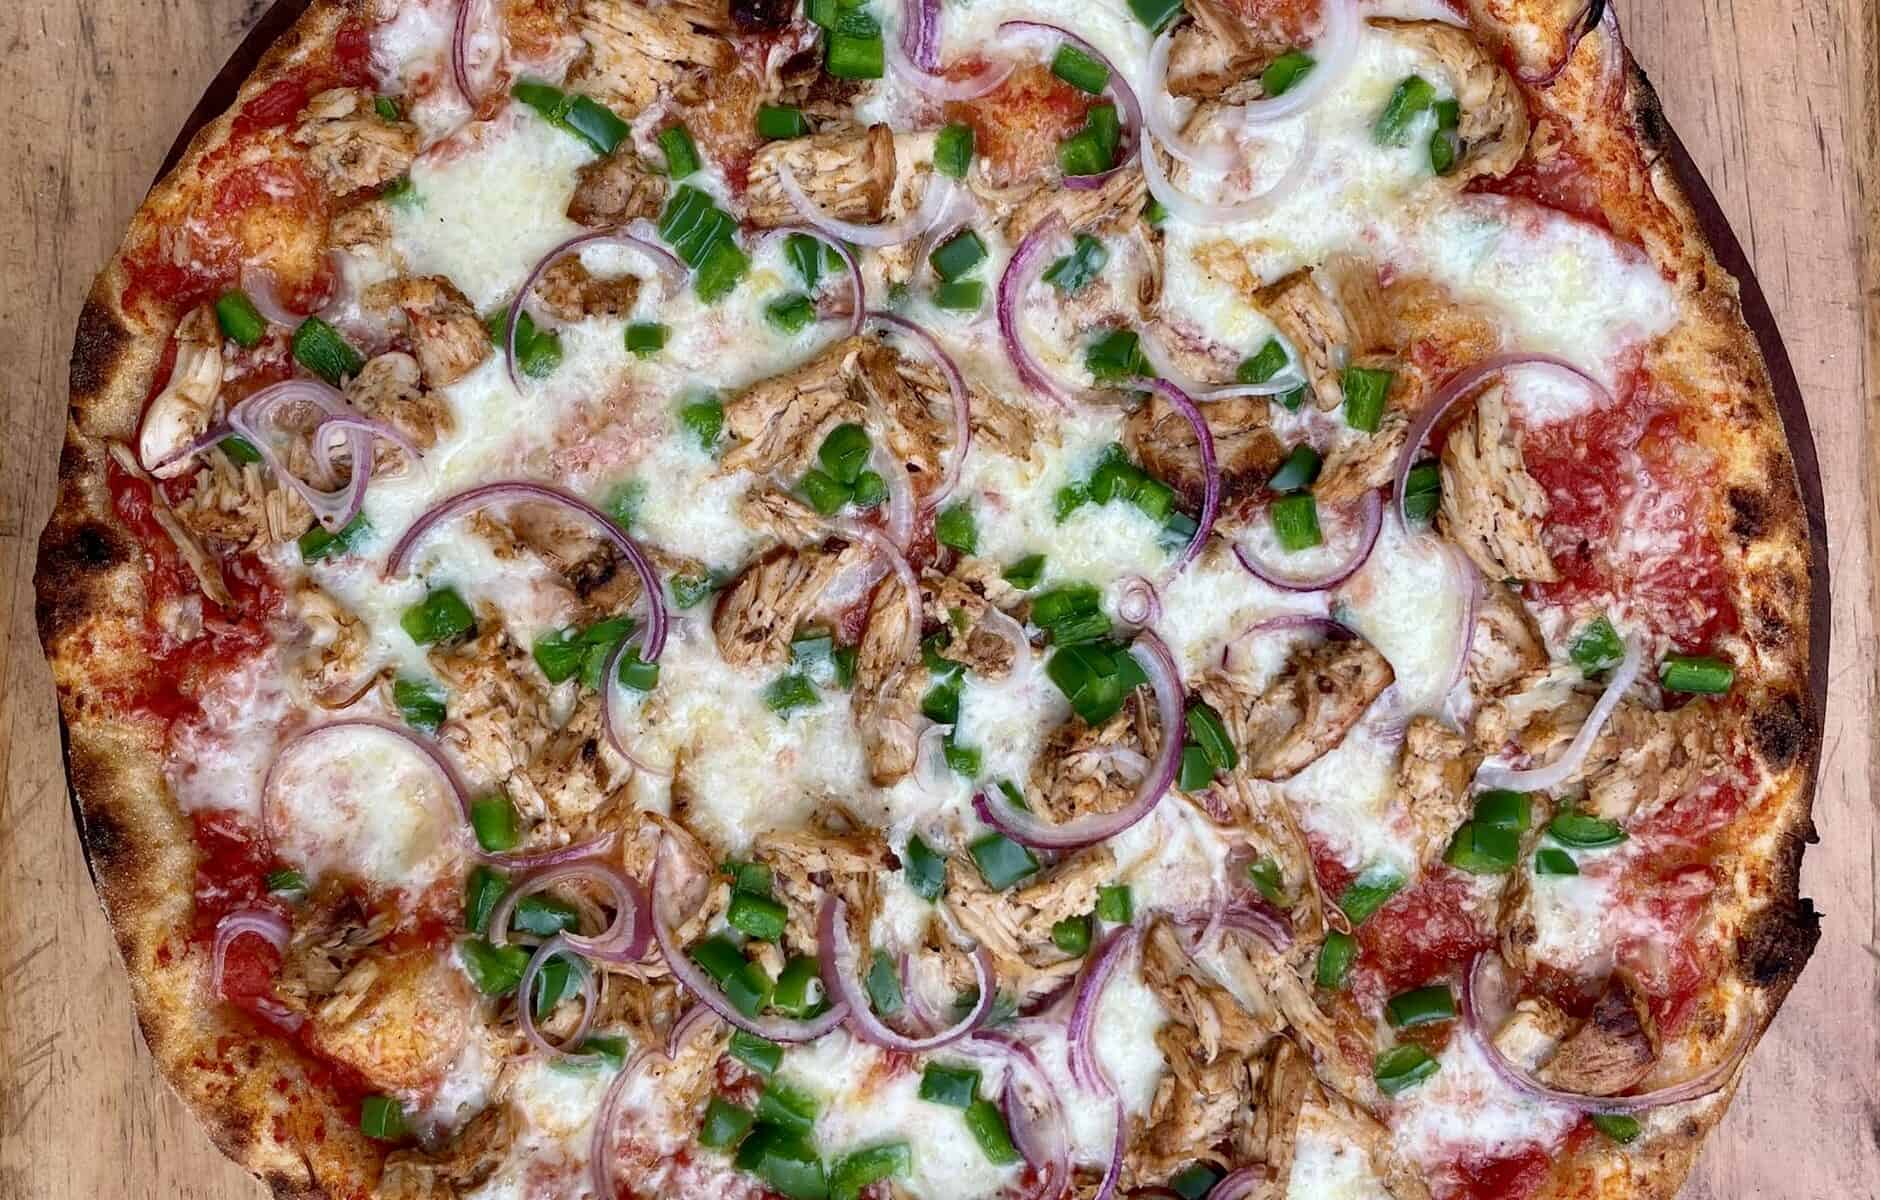 PULLED CHICKEN + CRISPY VEG – Delicately spiced, grilled and pulled local chicken with fresh and crispy green peppers and red onions.